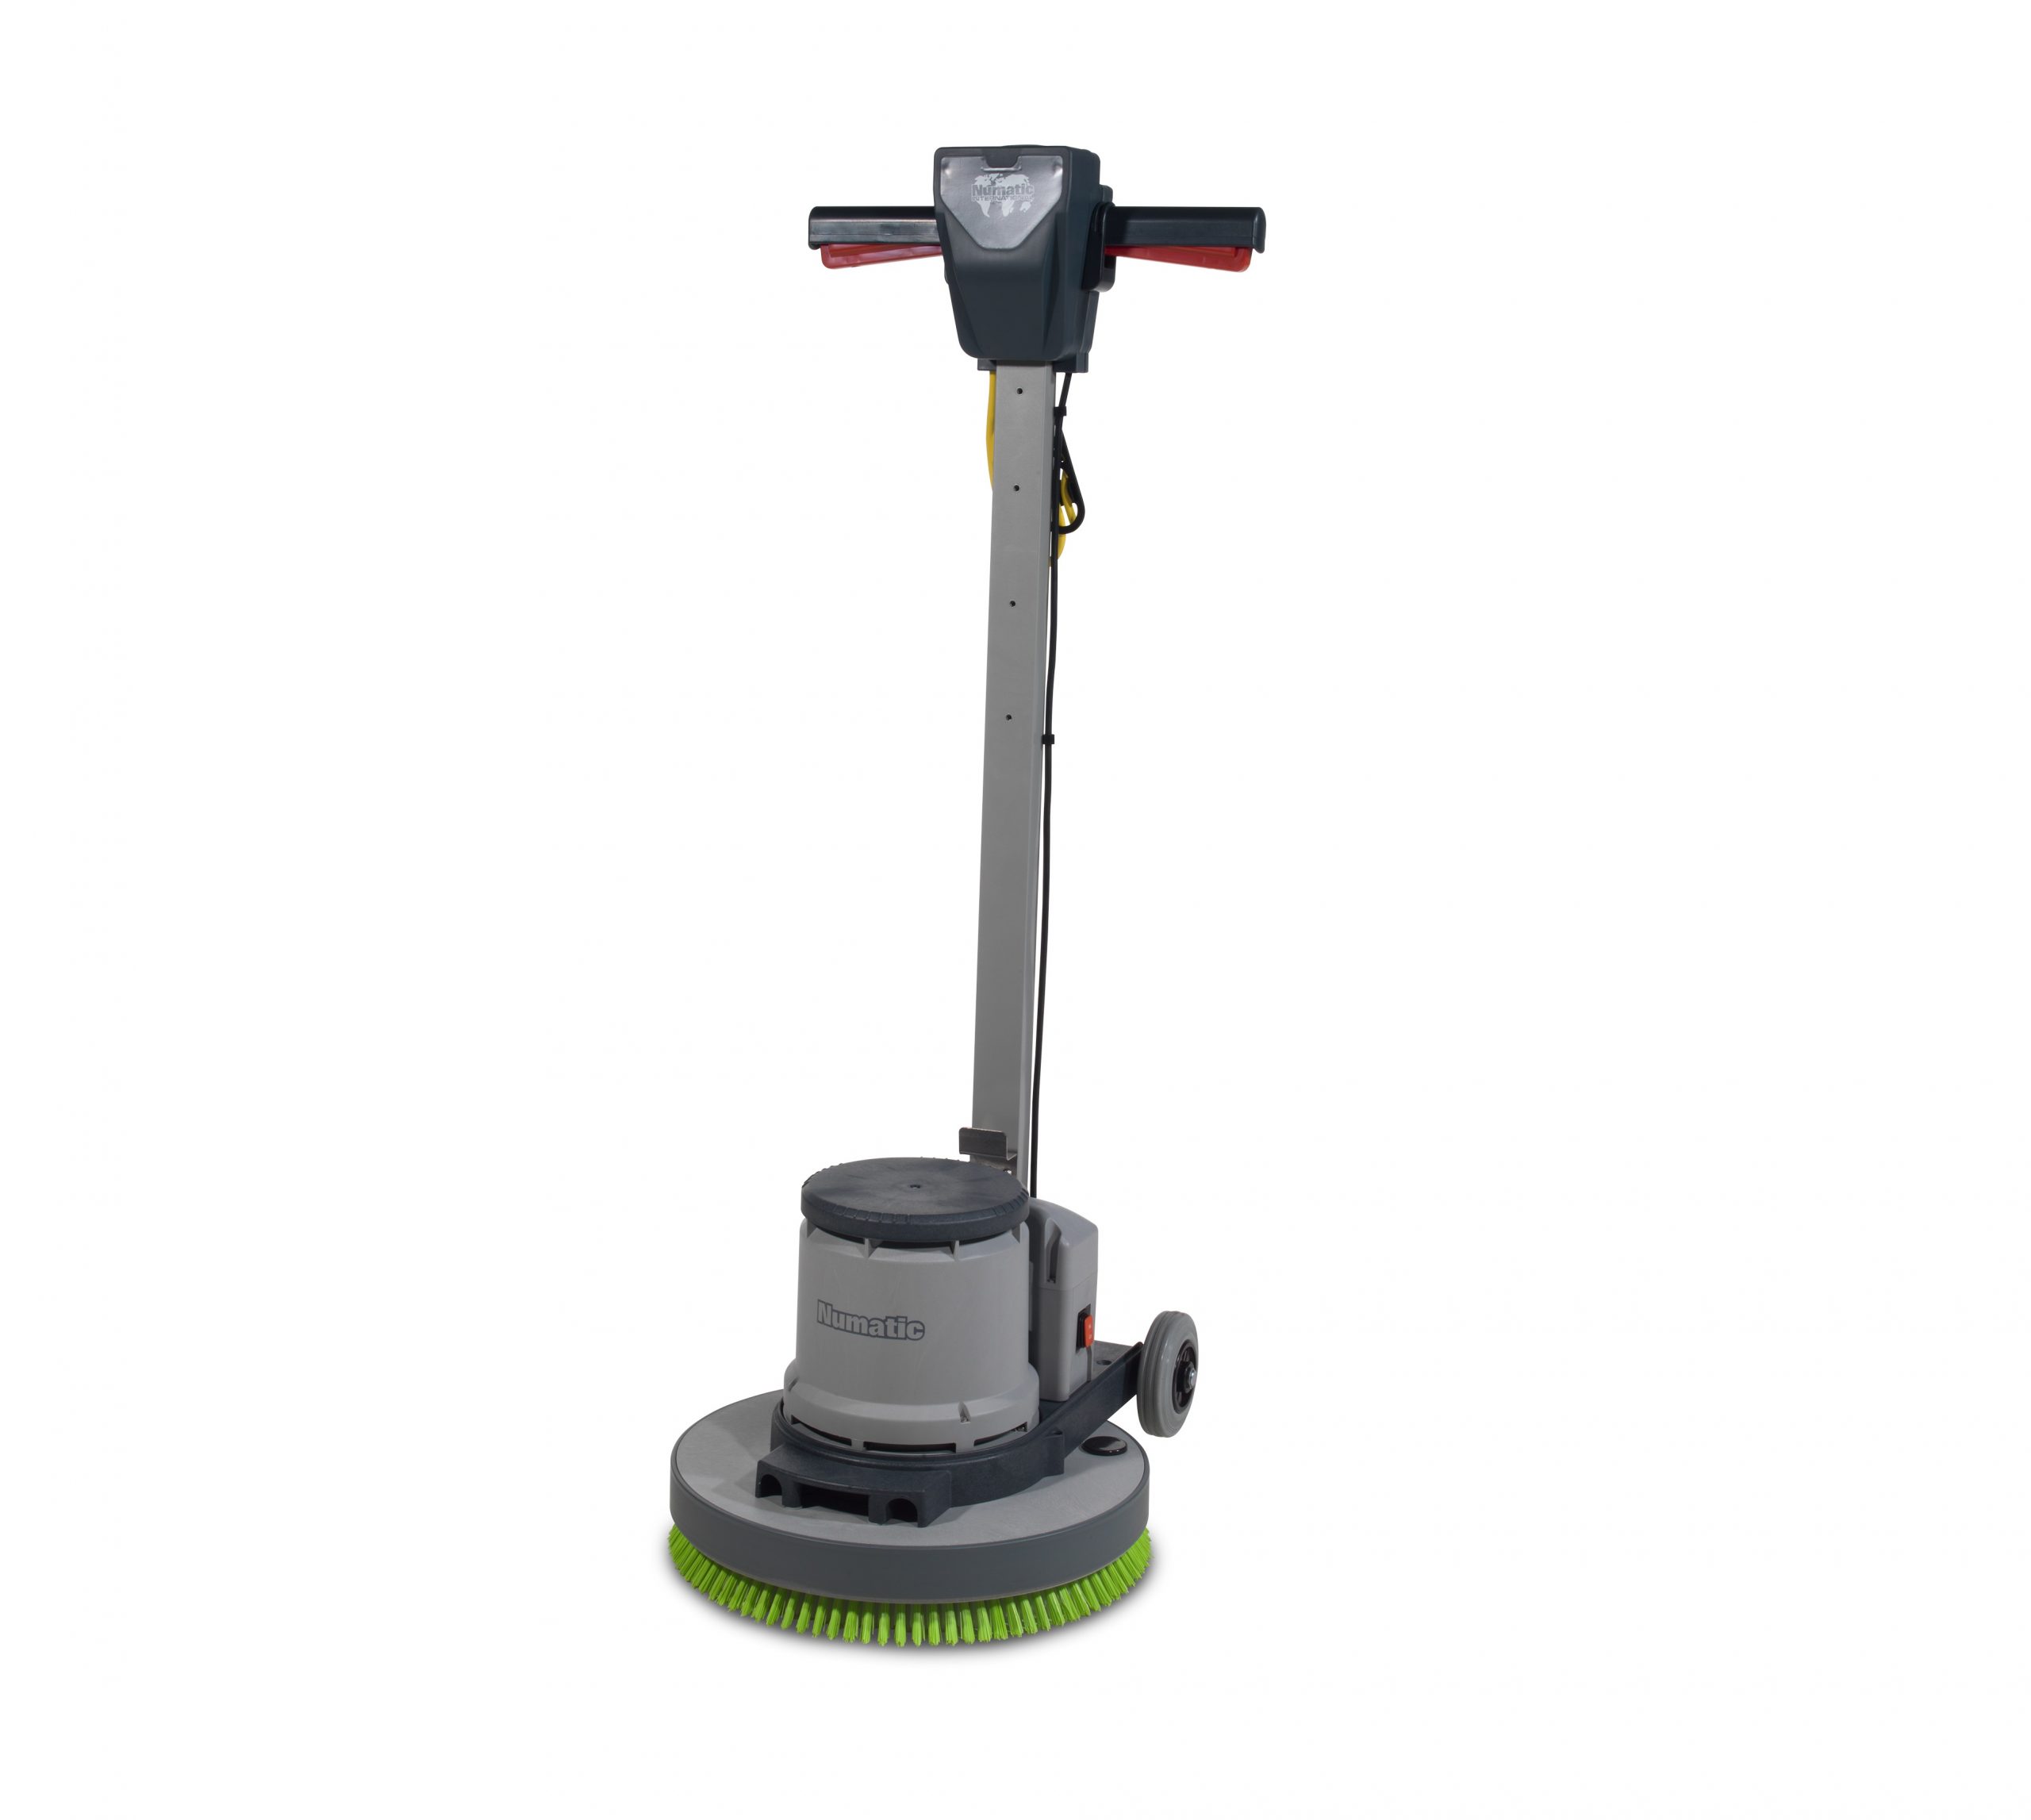 Numatic Hft1530 Twin Speed Floor Polisher Scrubber With Drive